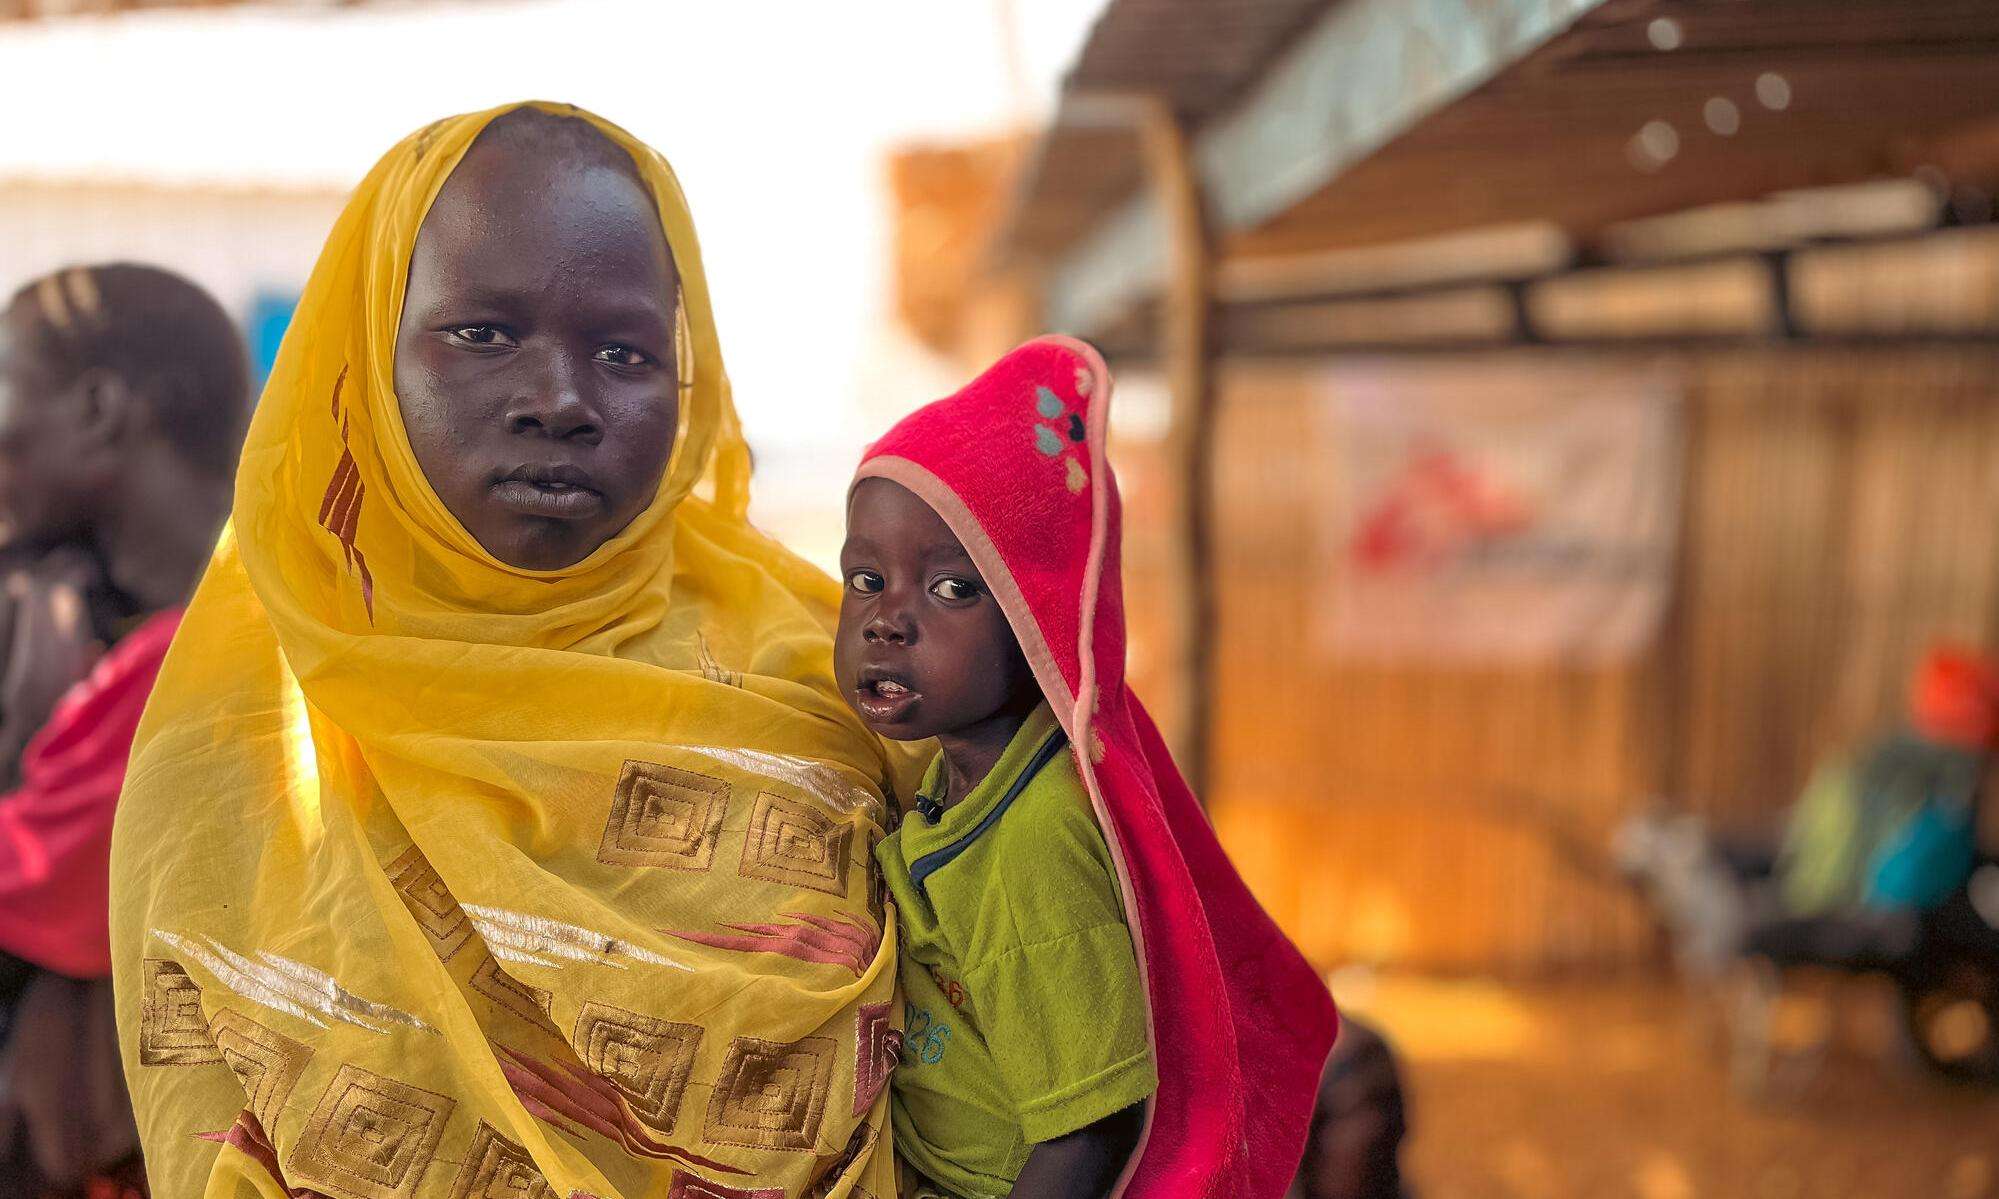 A woman in a yellow scarf and her child who are internally displaced in Sudan due to the current conflict.